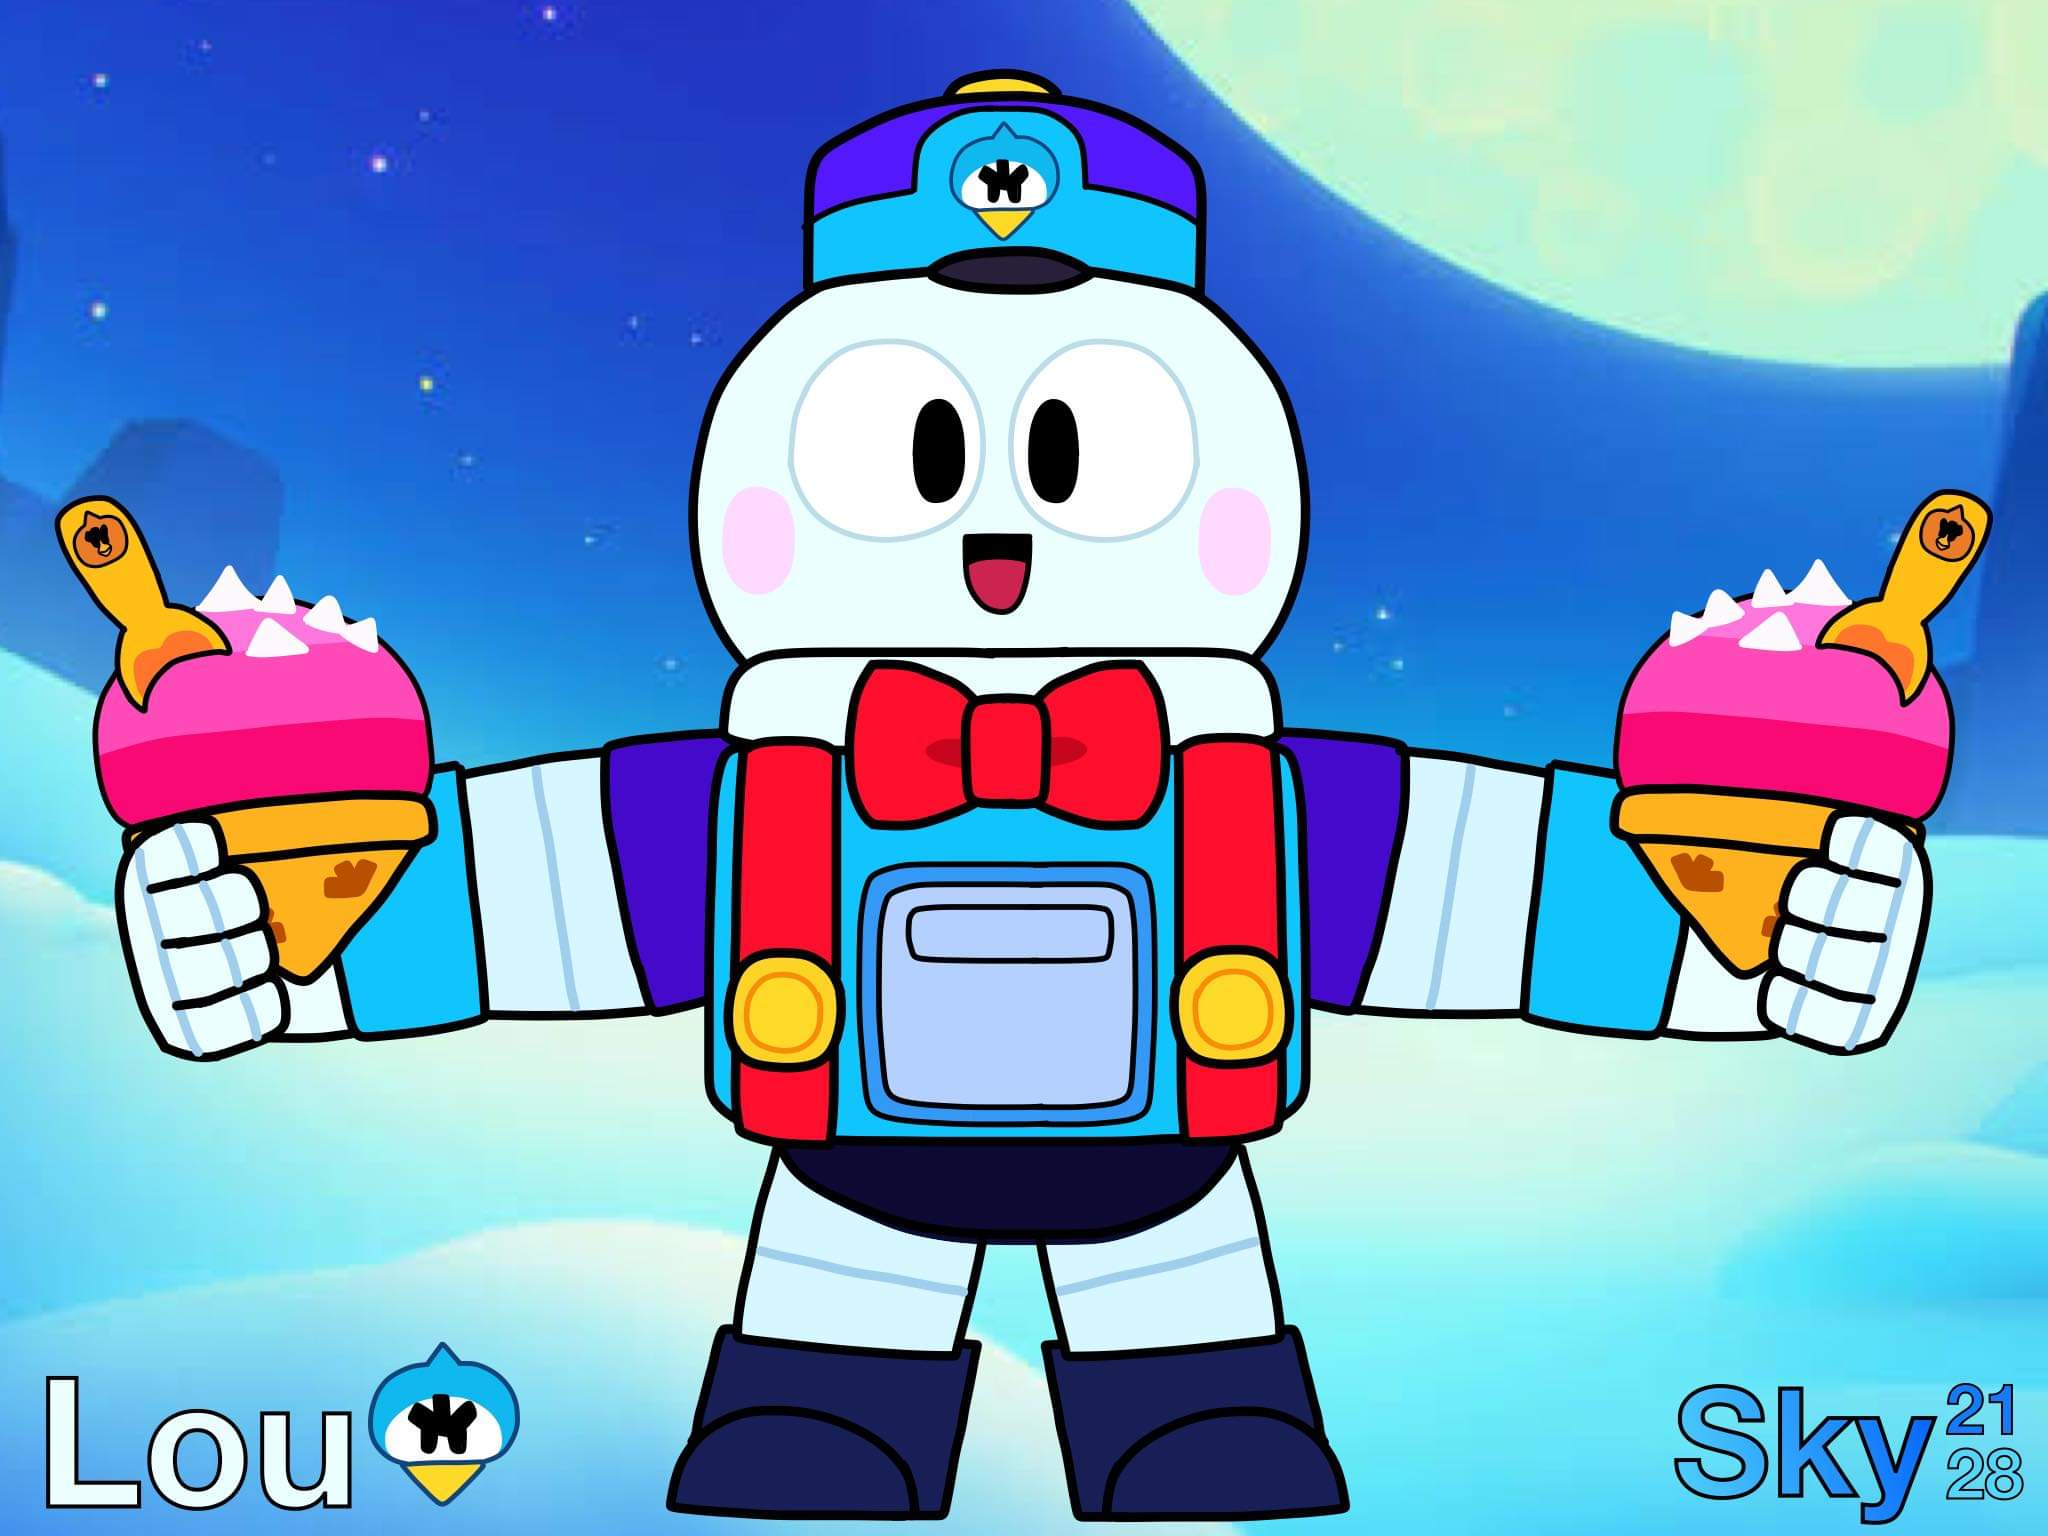 Get a cool cone of ice cream from our newest brawler, Lou! (repost)